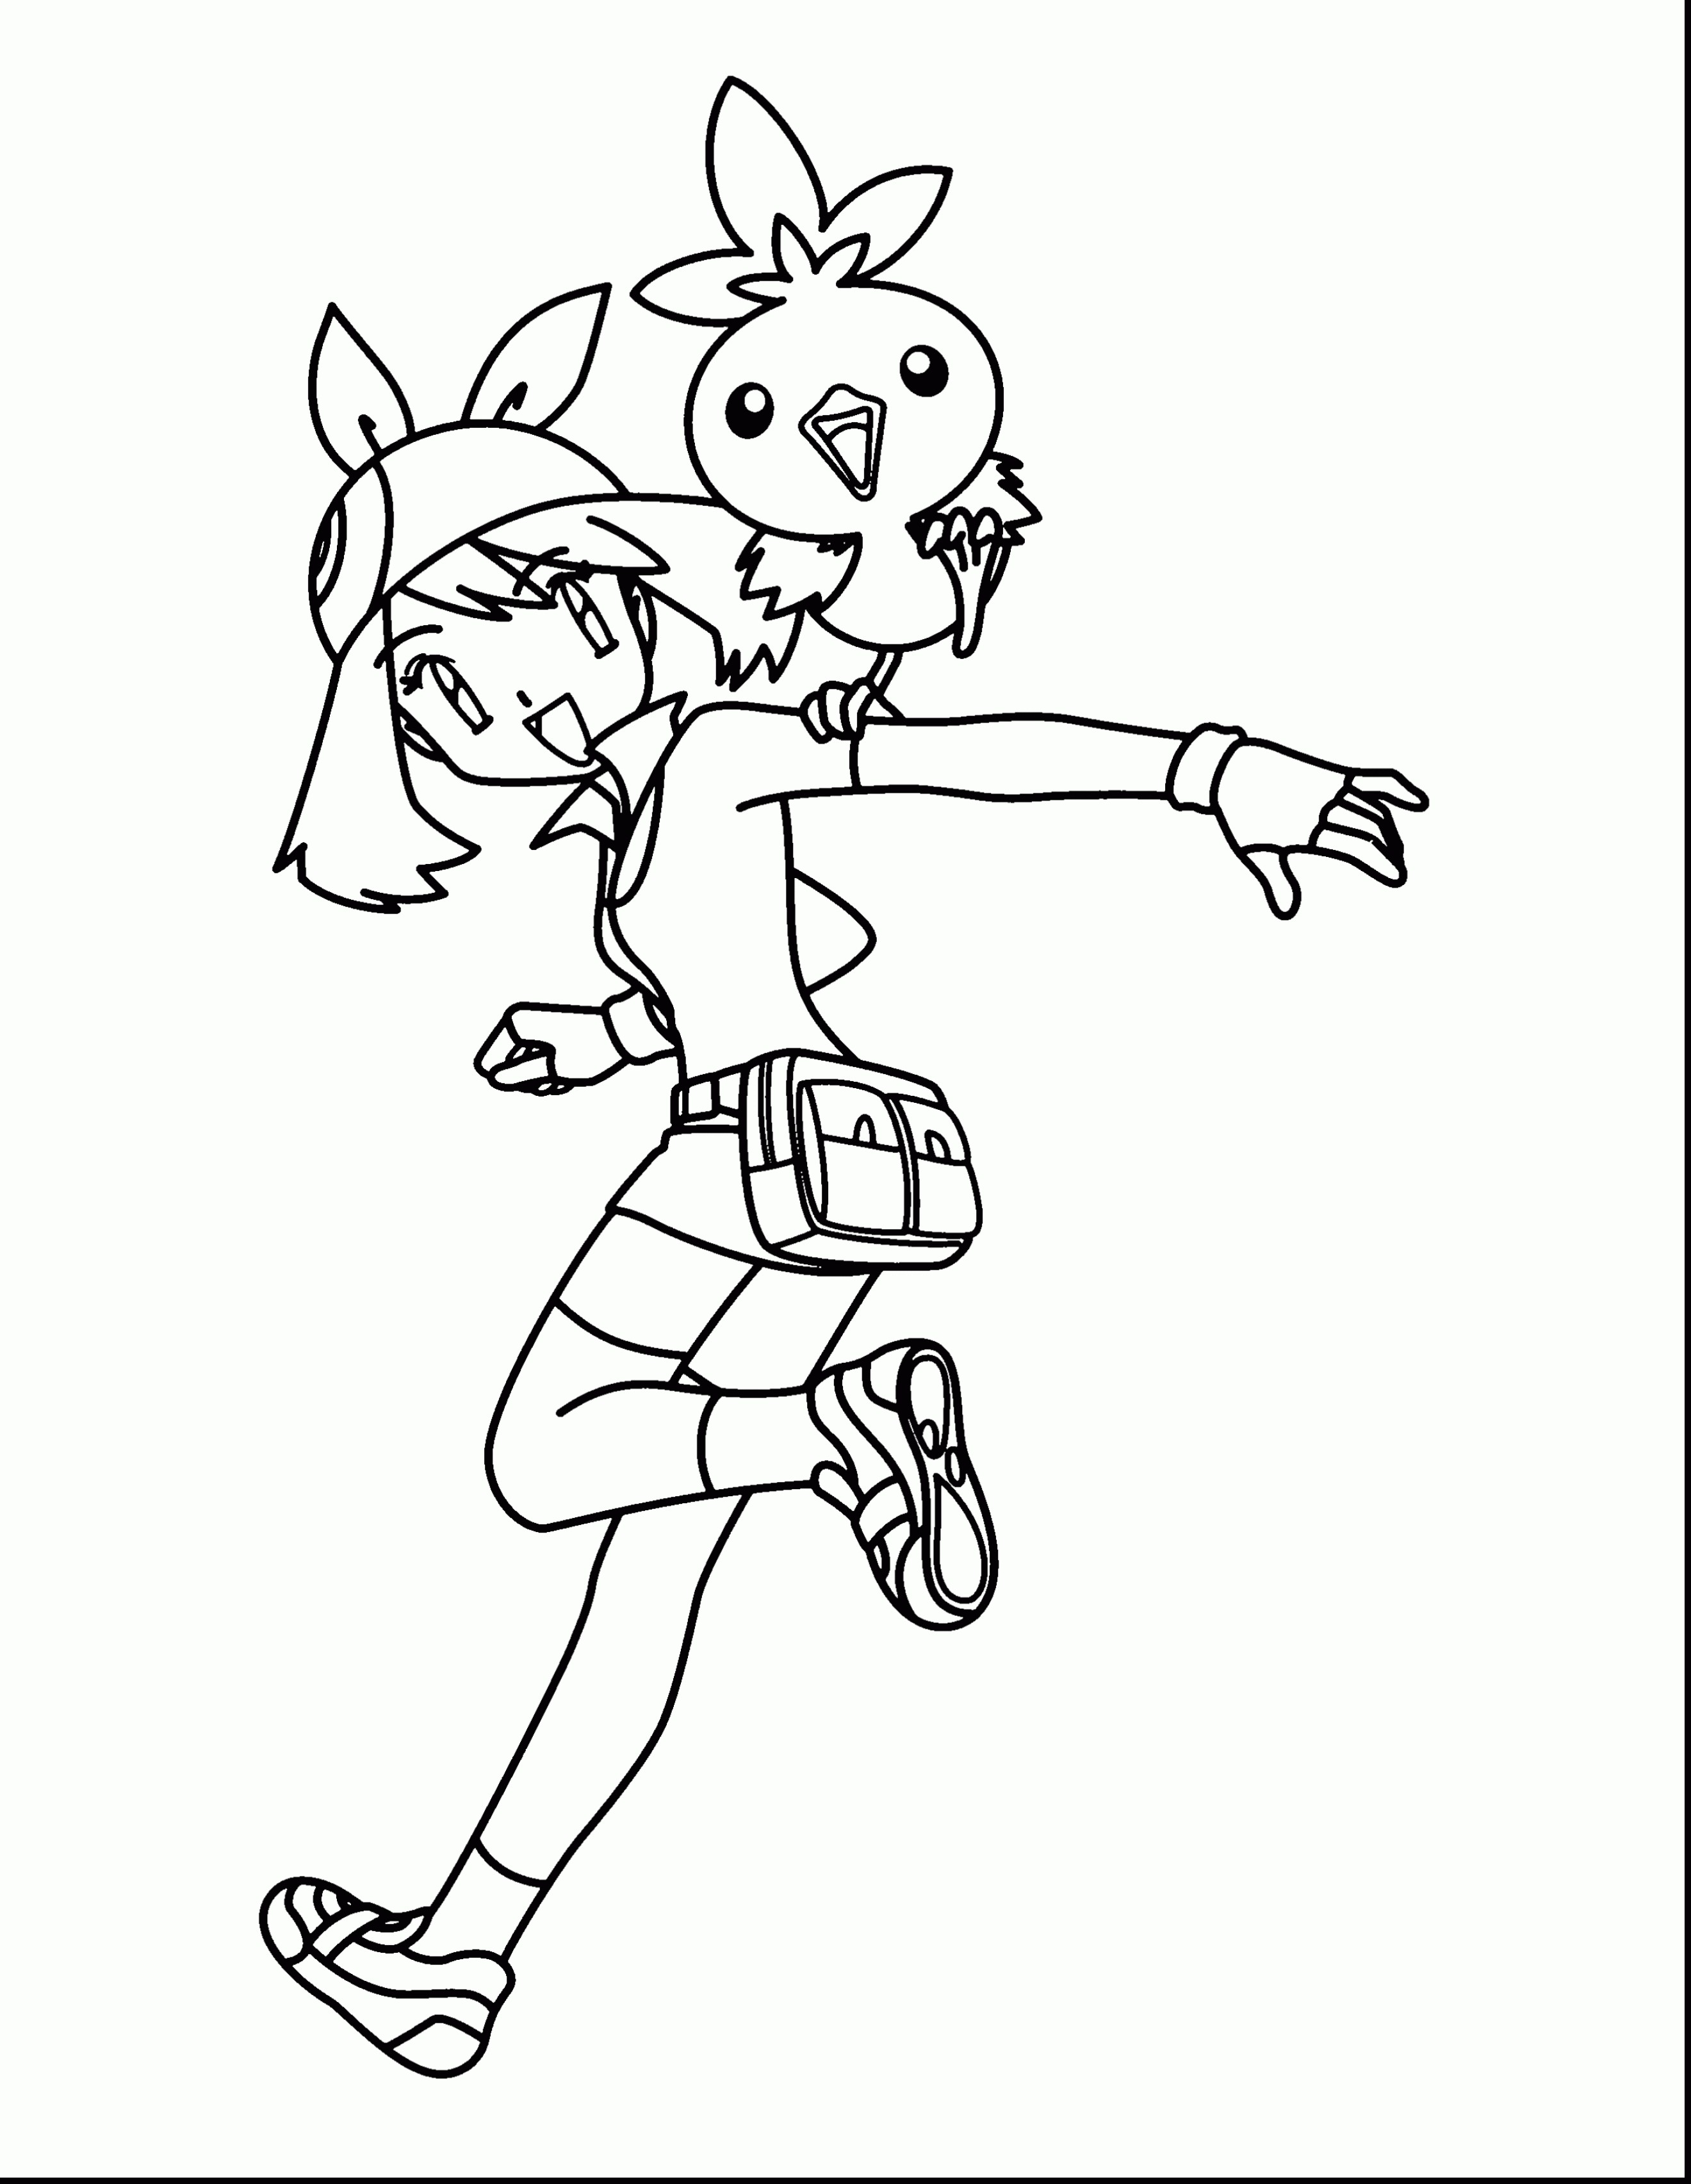 Fresh pokemon may coloring pages 10